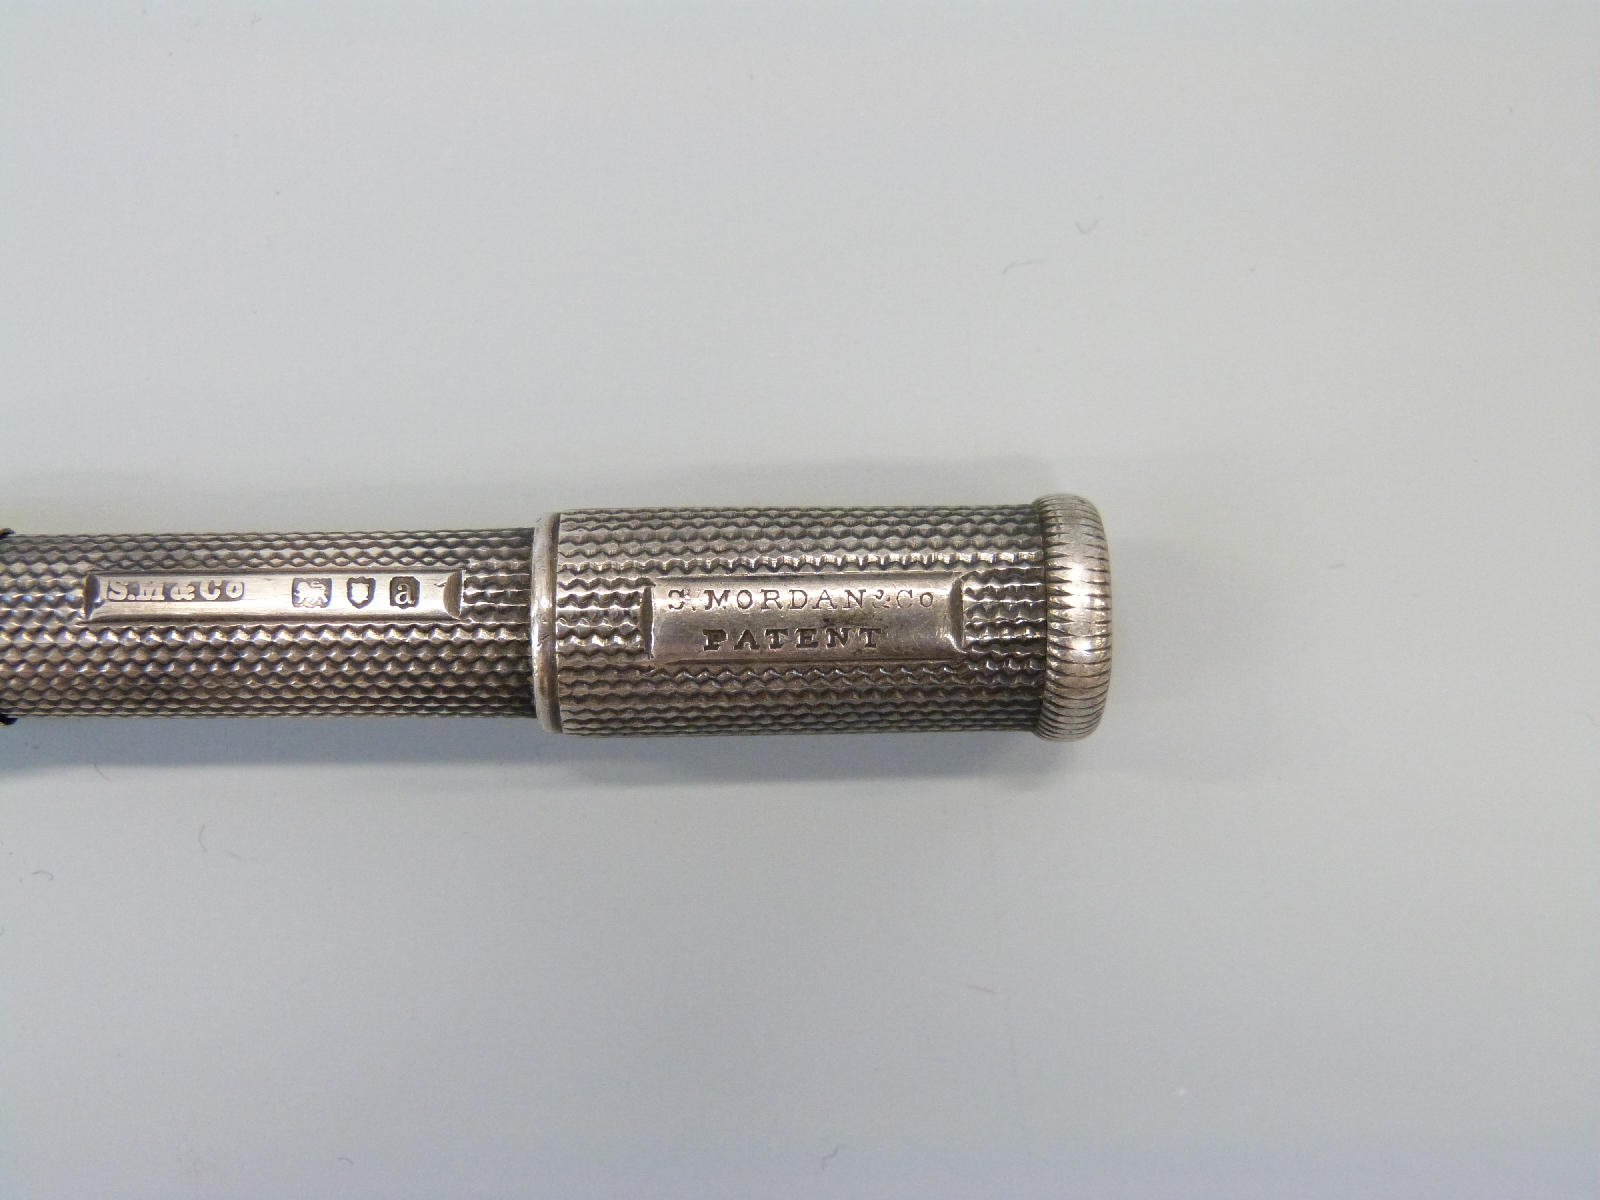 S. Mordan & Co Patent hallmarked silver double ended pen/pencil and a small silver trophy. - Image 5 of 5